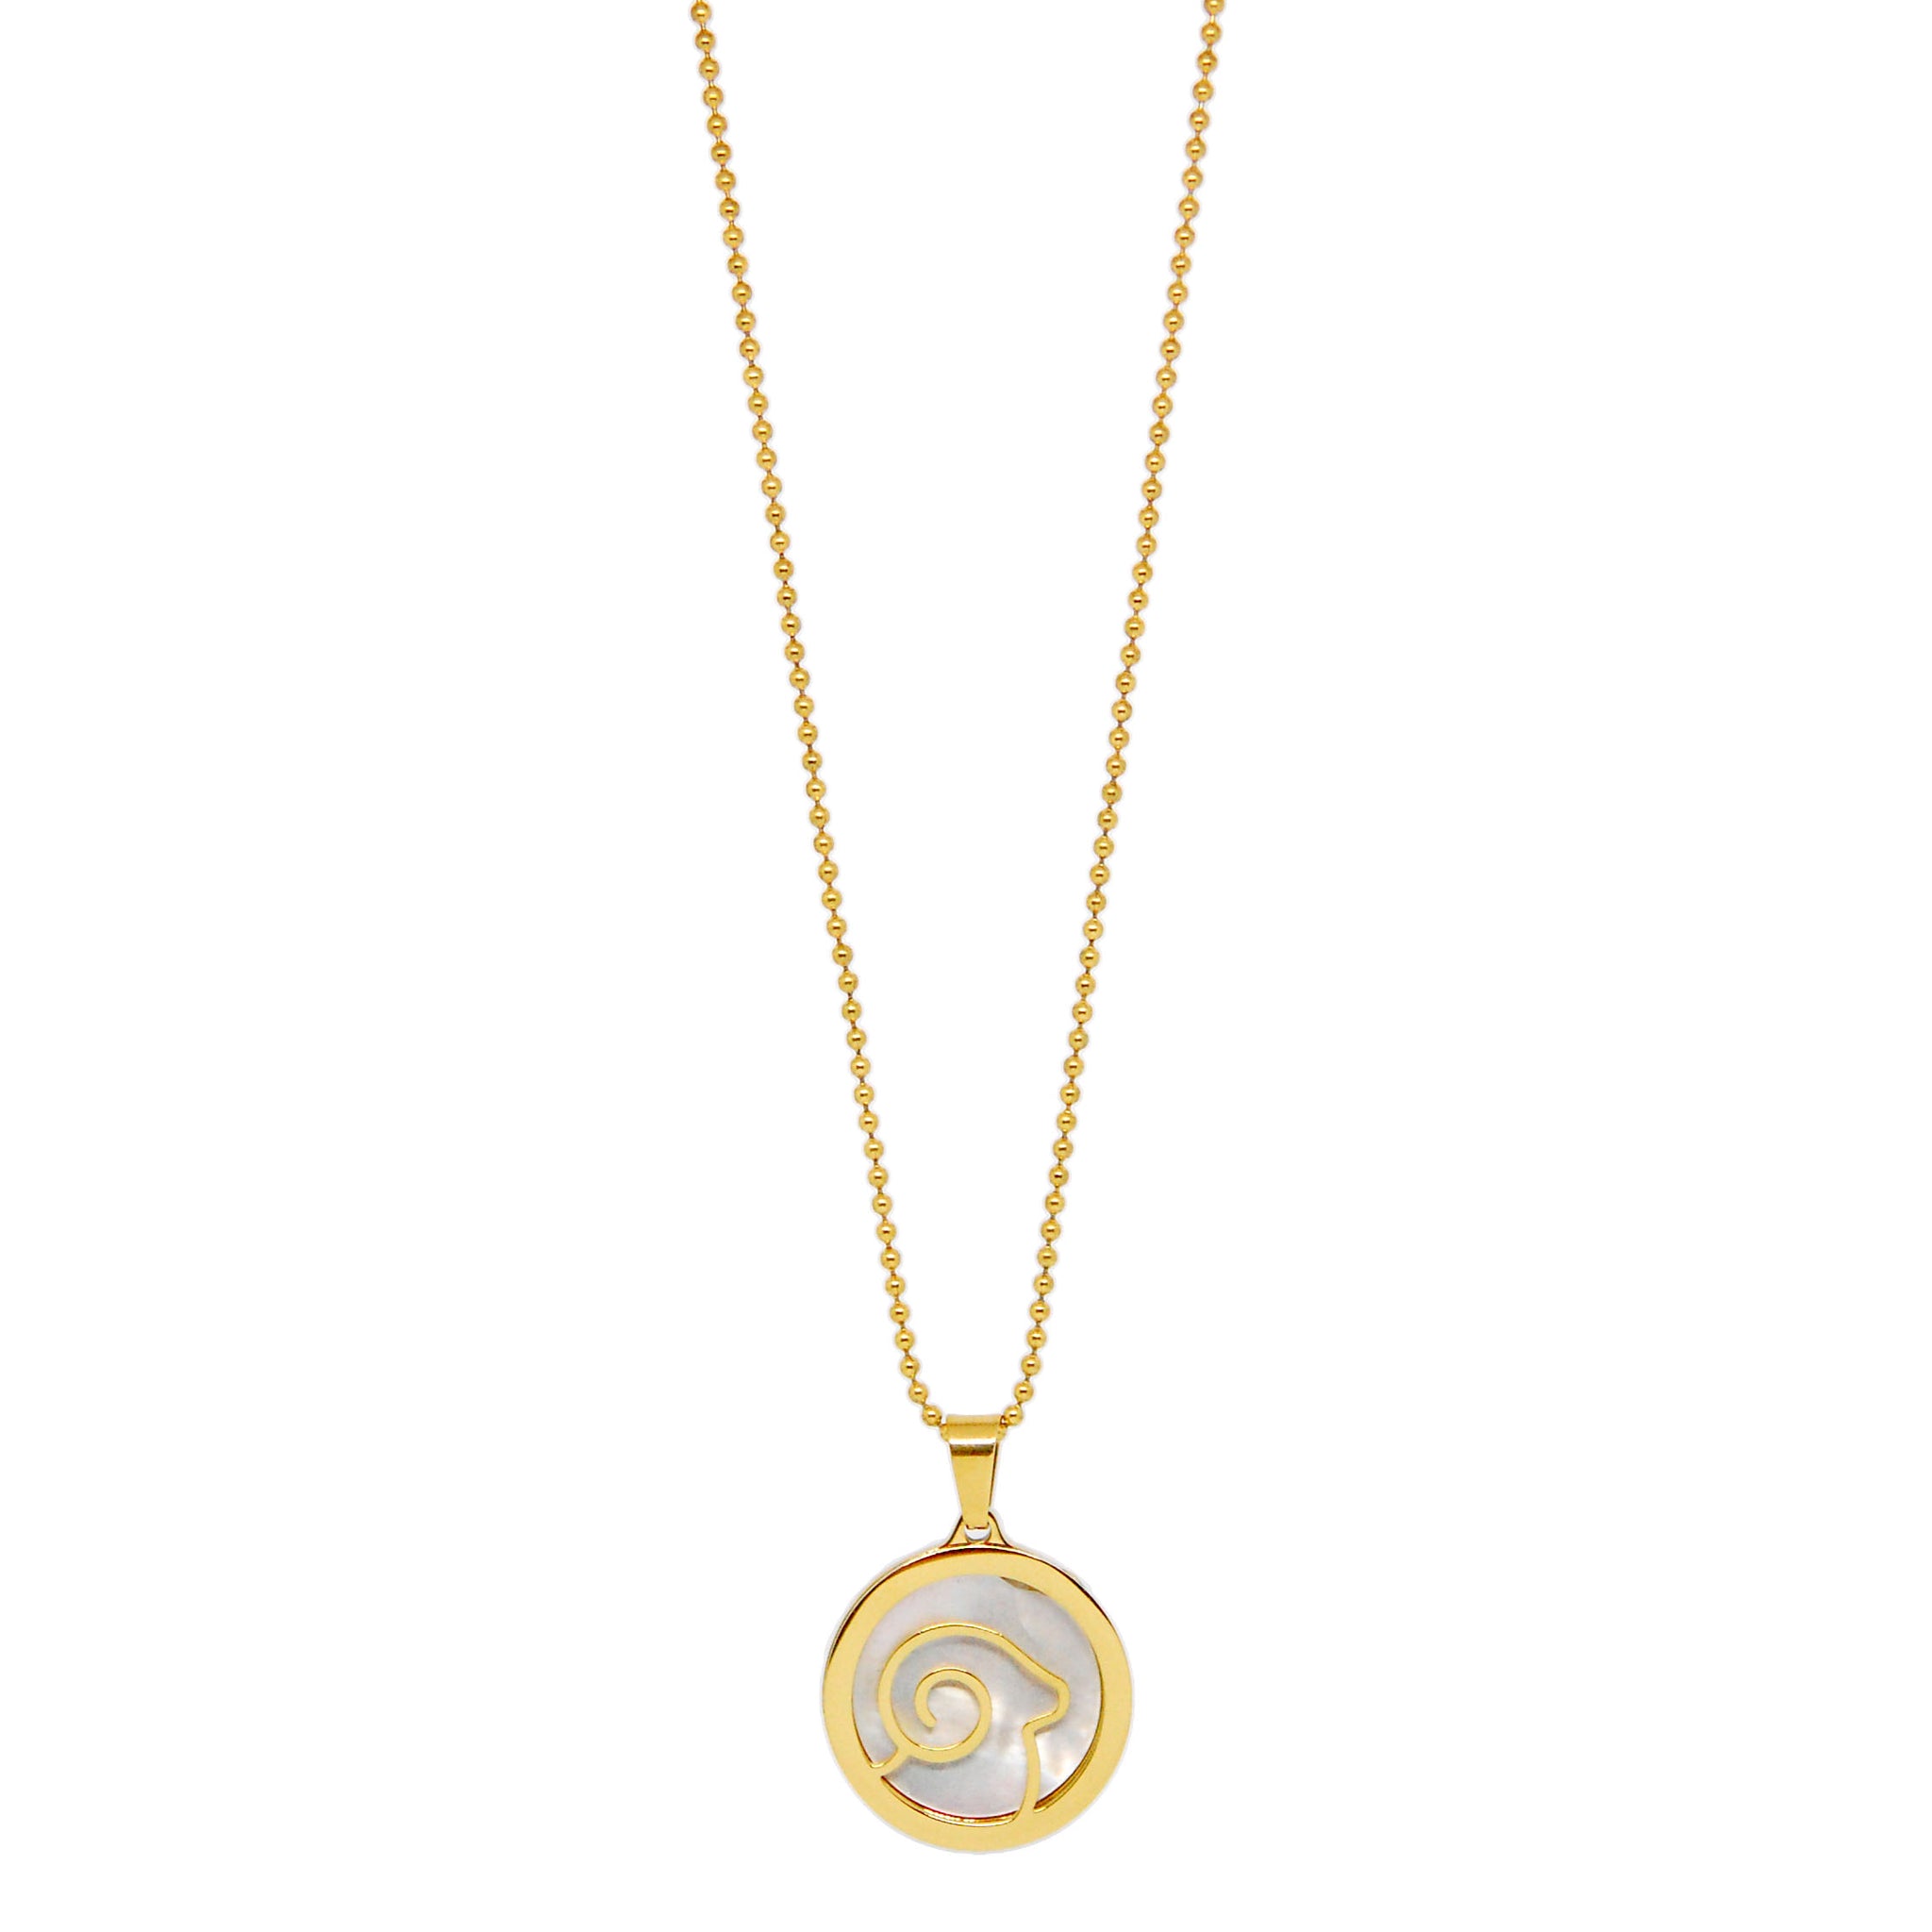 ESN 7969: All IPG Mop Aries Zodiac Necklace w/ 18" IPG Ball Chain